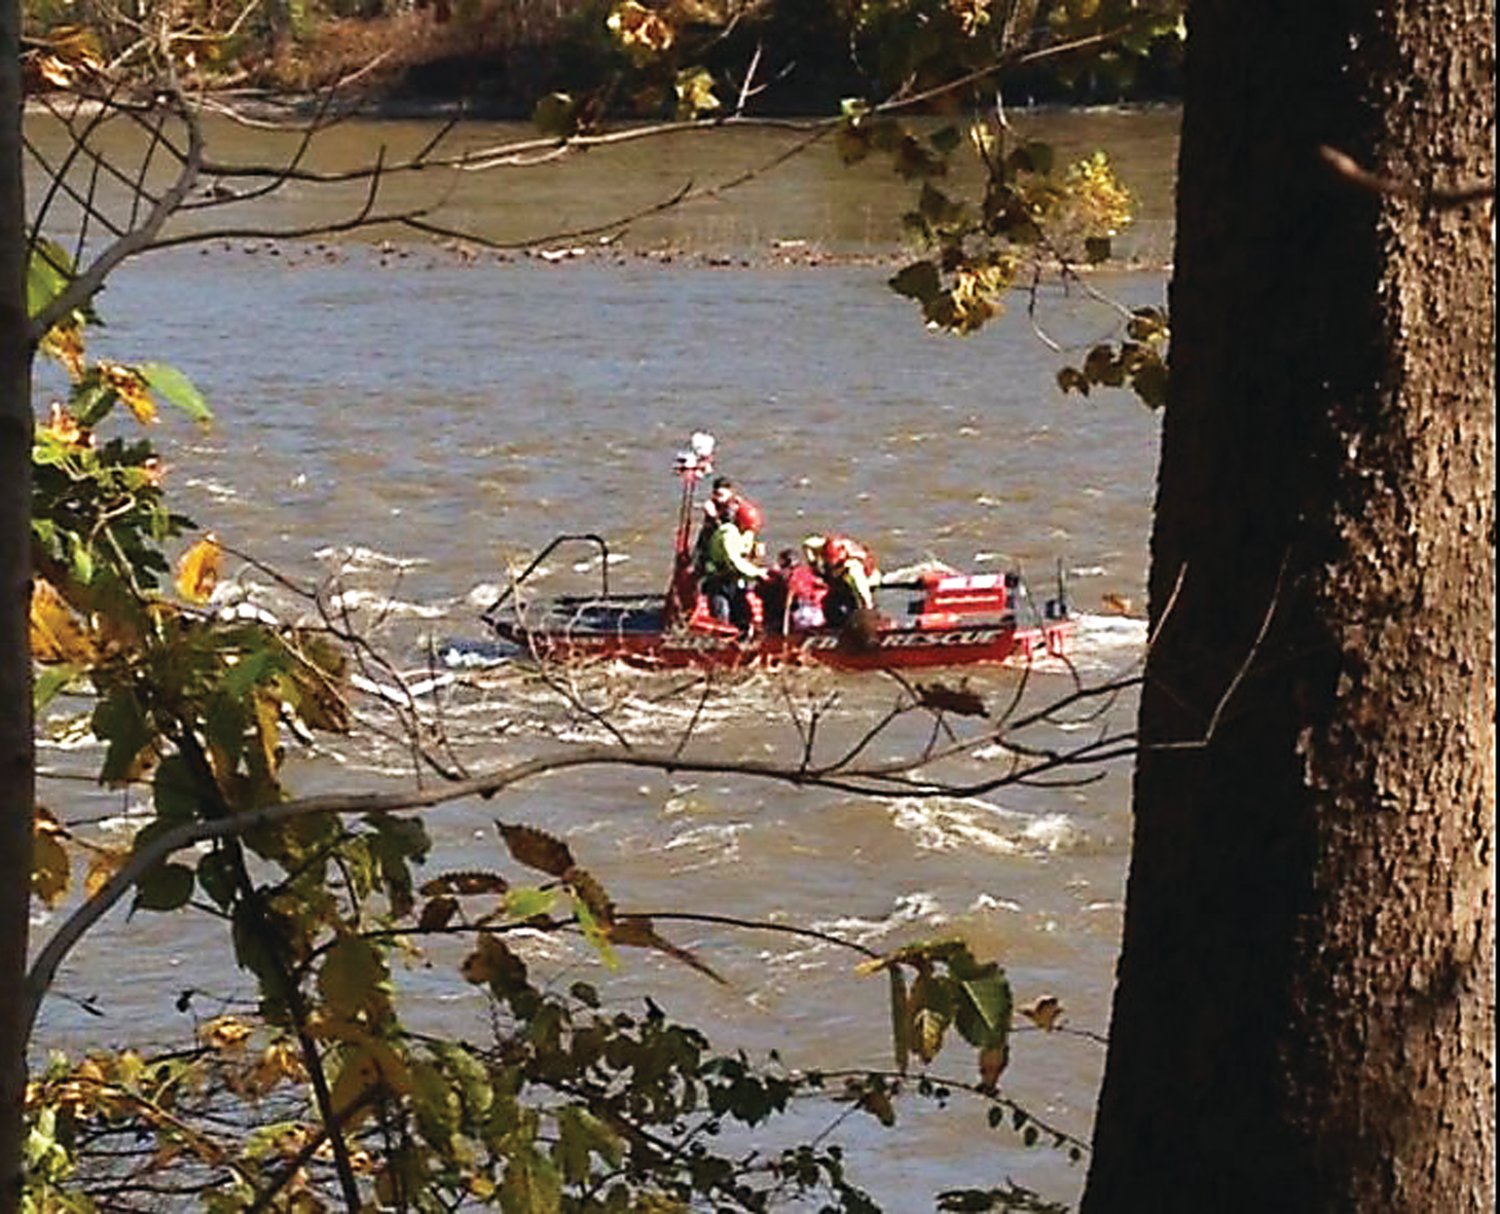 Firefighters from Delaware Valley Fire Co. rescue a woman clinging to a tree branch in the Delaware River in Erwinna. Photograph from a video by Carol Staudenmayer